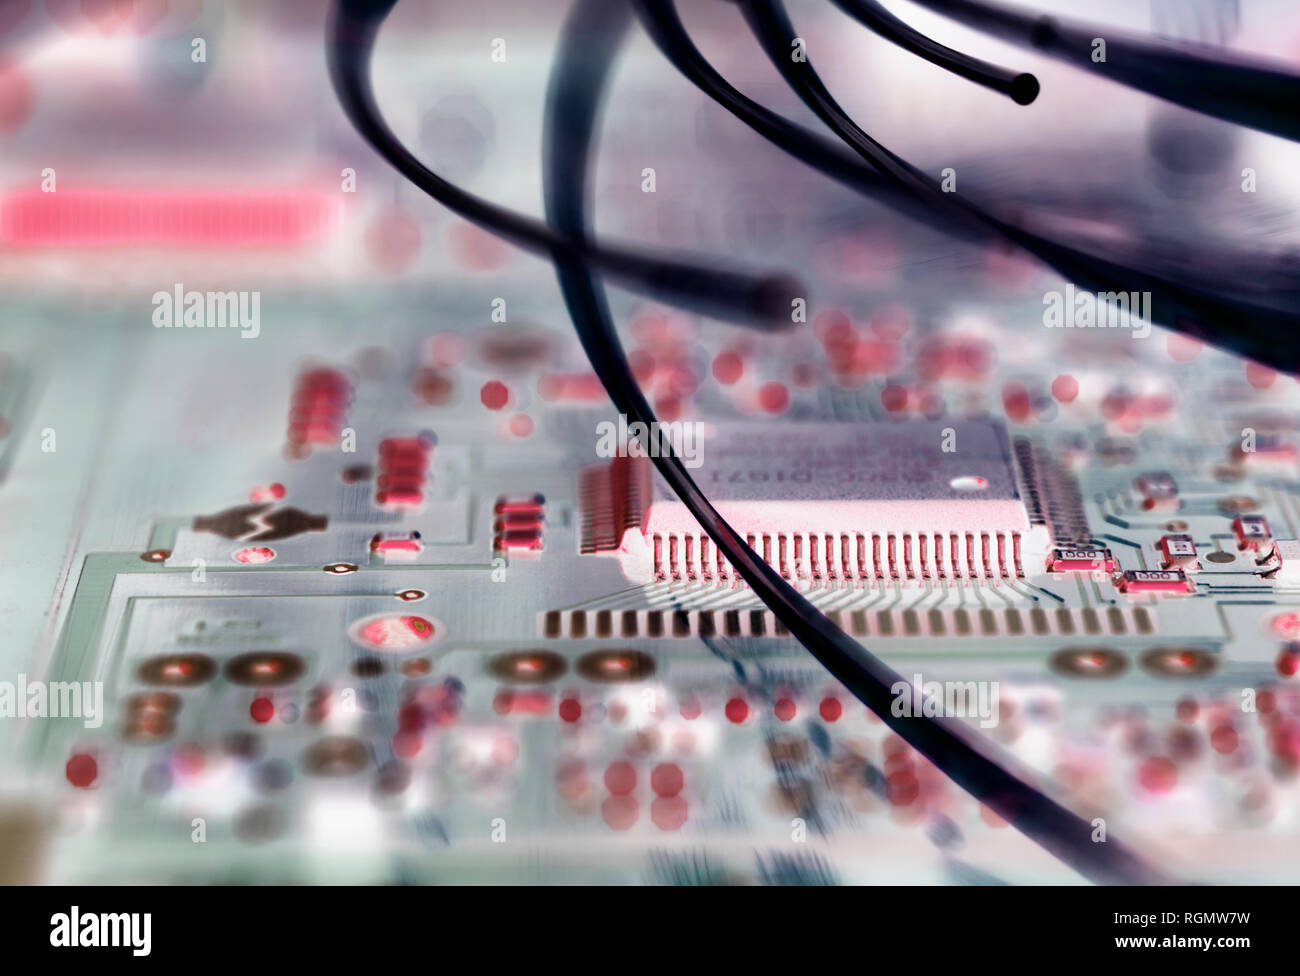 Fibre optics attacking electronic circuit boards with a virus Stock Photo